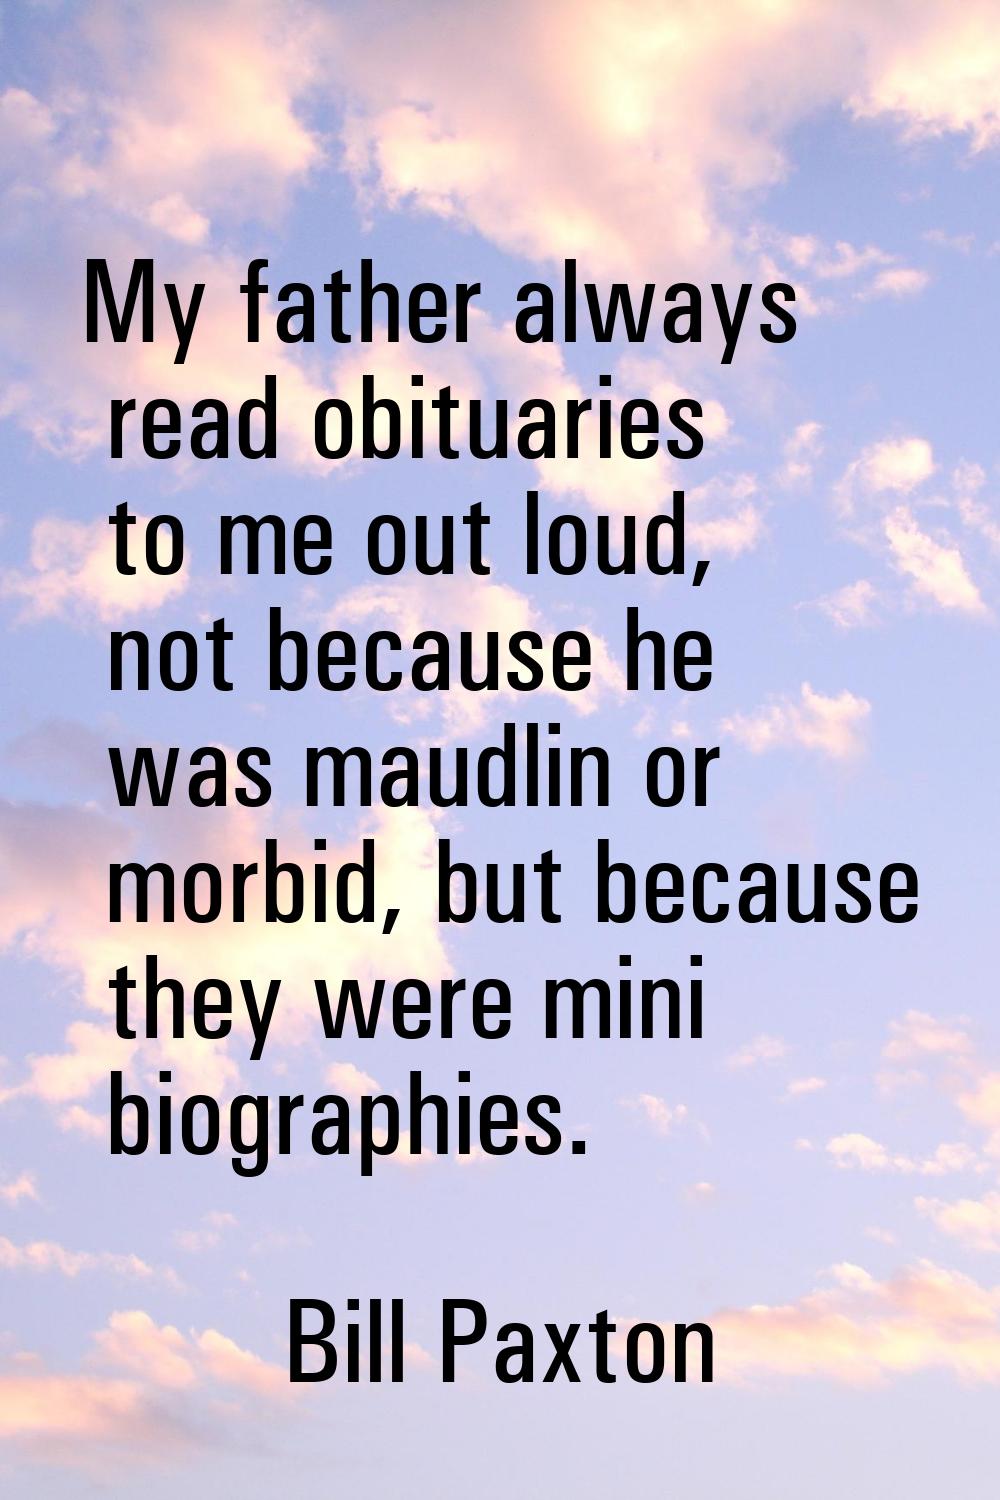 My father always read obituaries to me out loud, not because he was maudlin or morbid, but because 